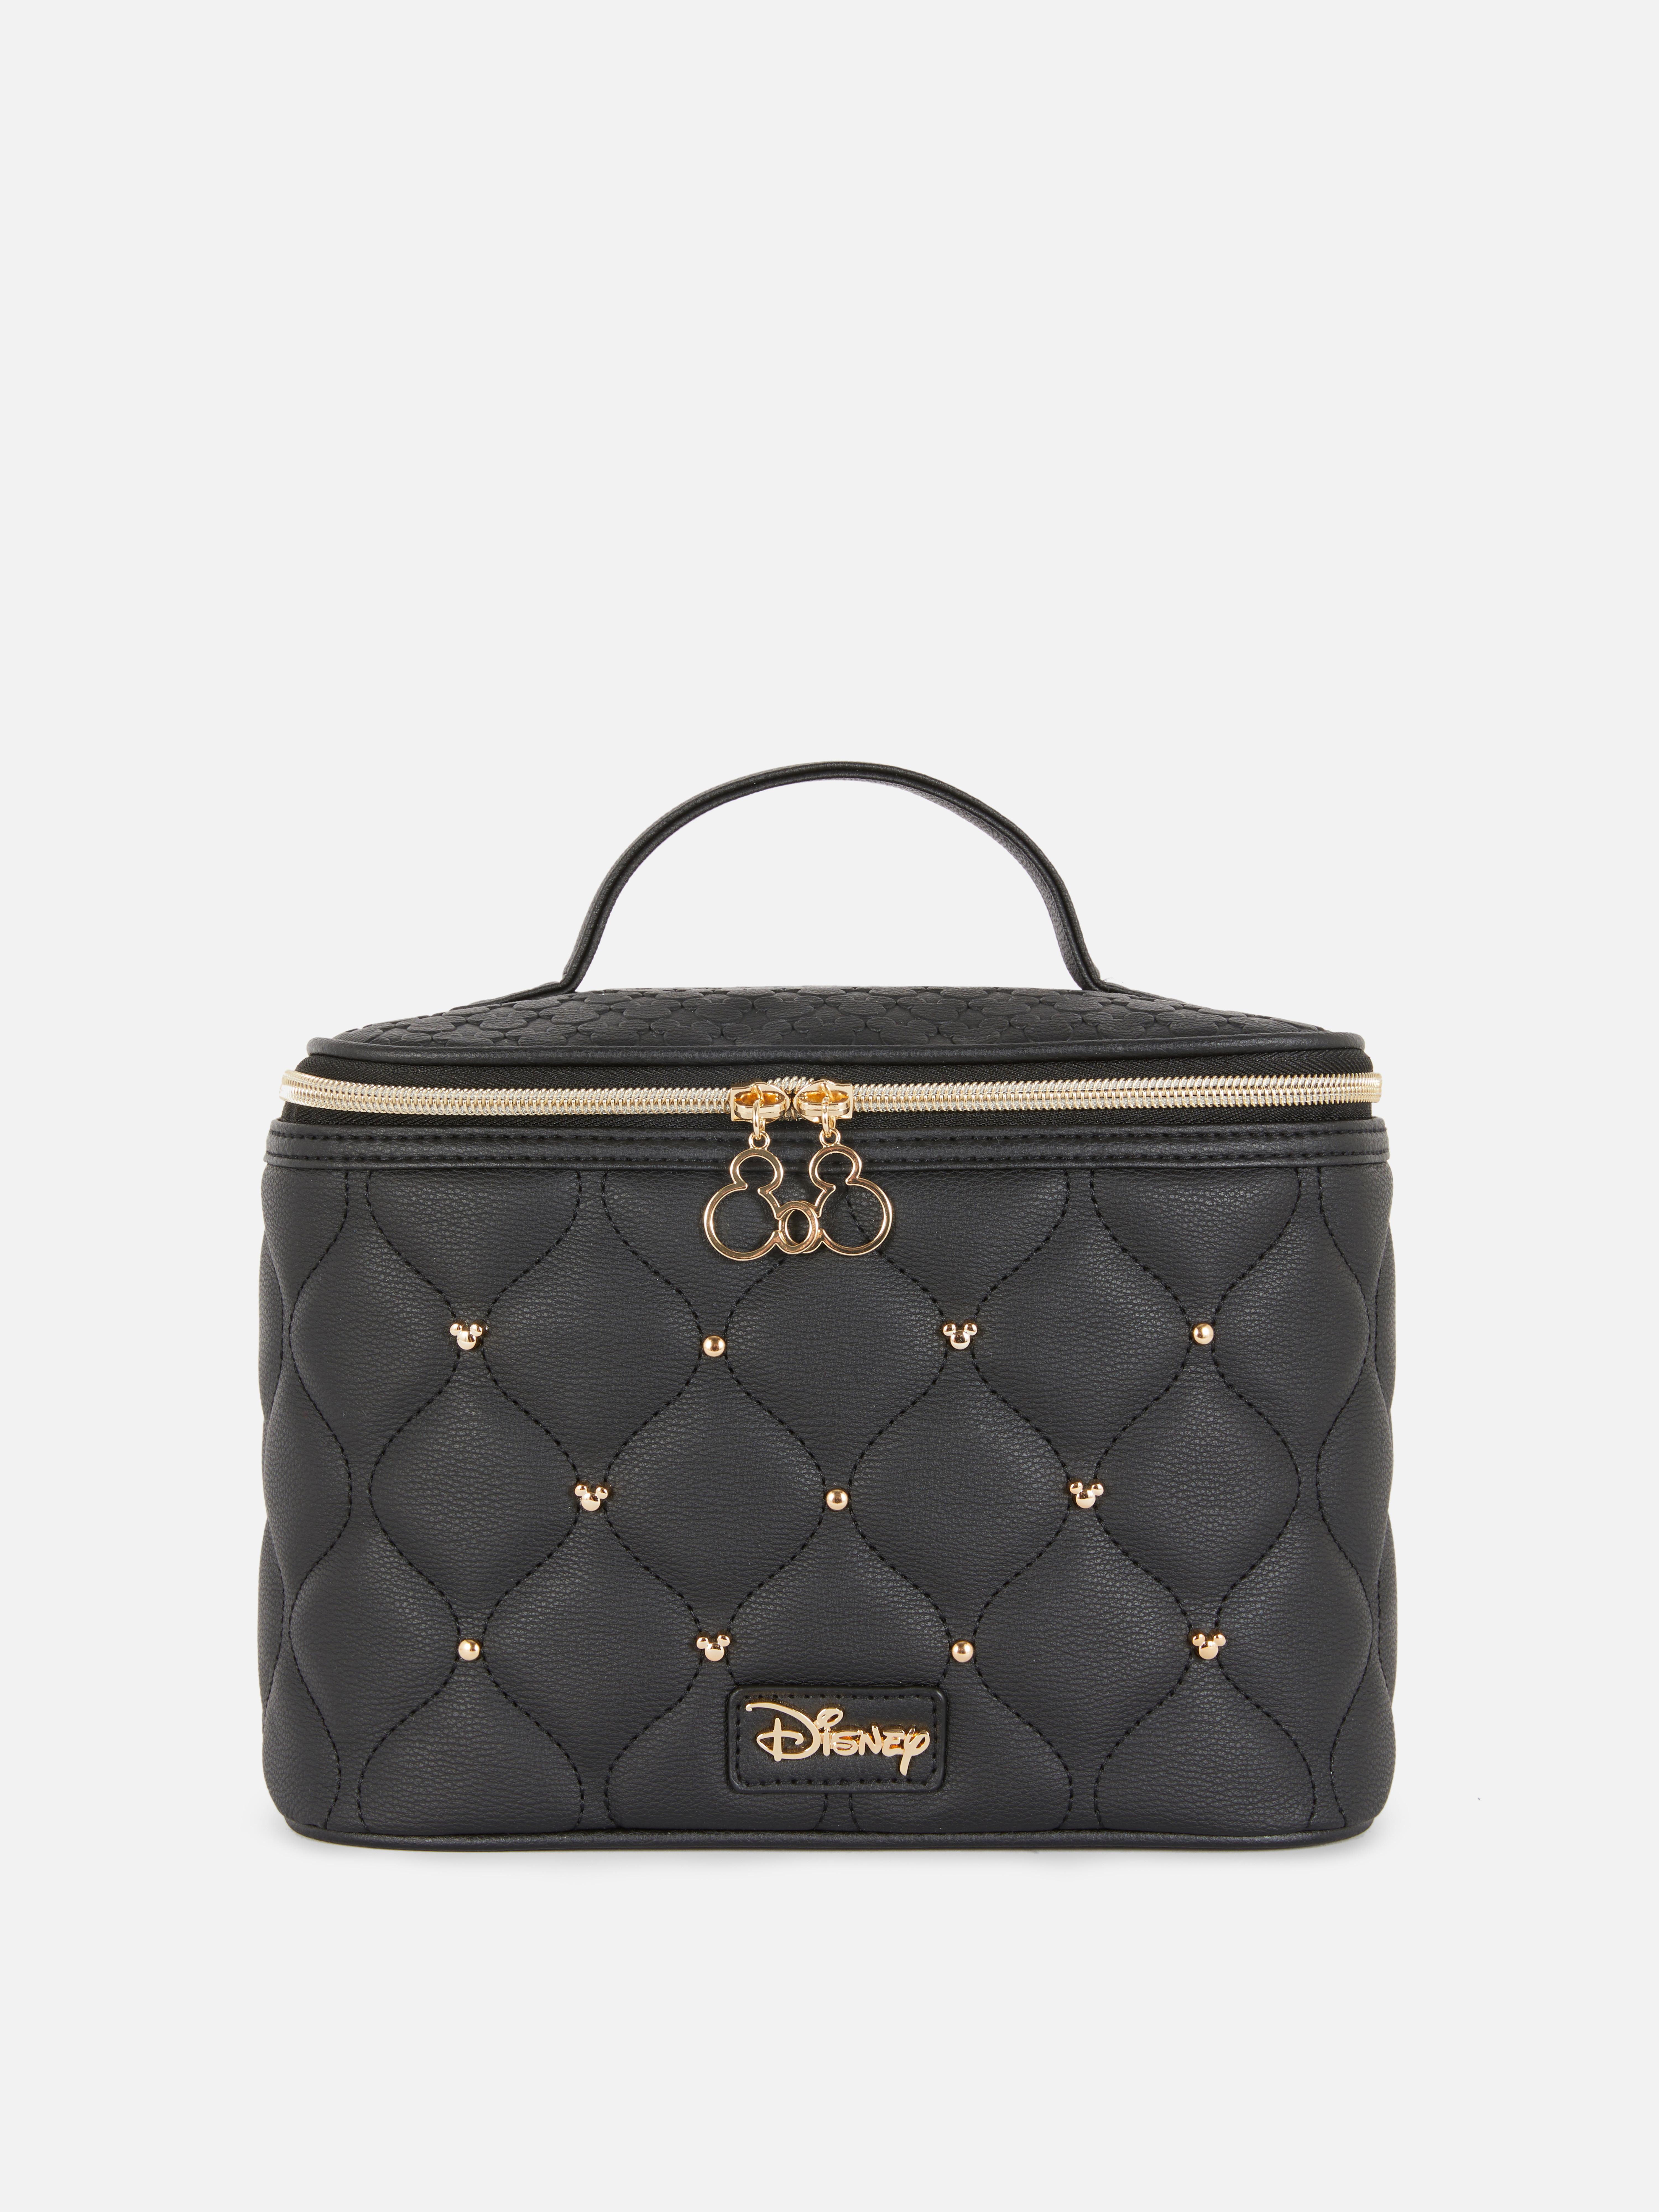 Disney's Mickey Mouse Quilted Vanity Case